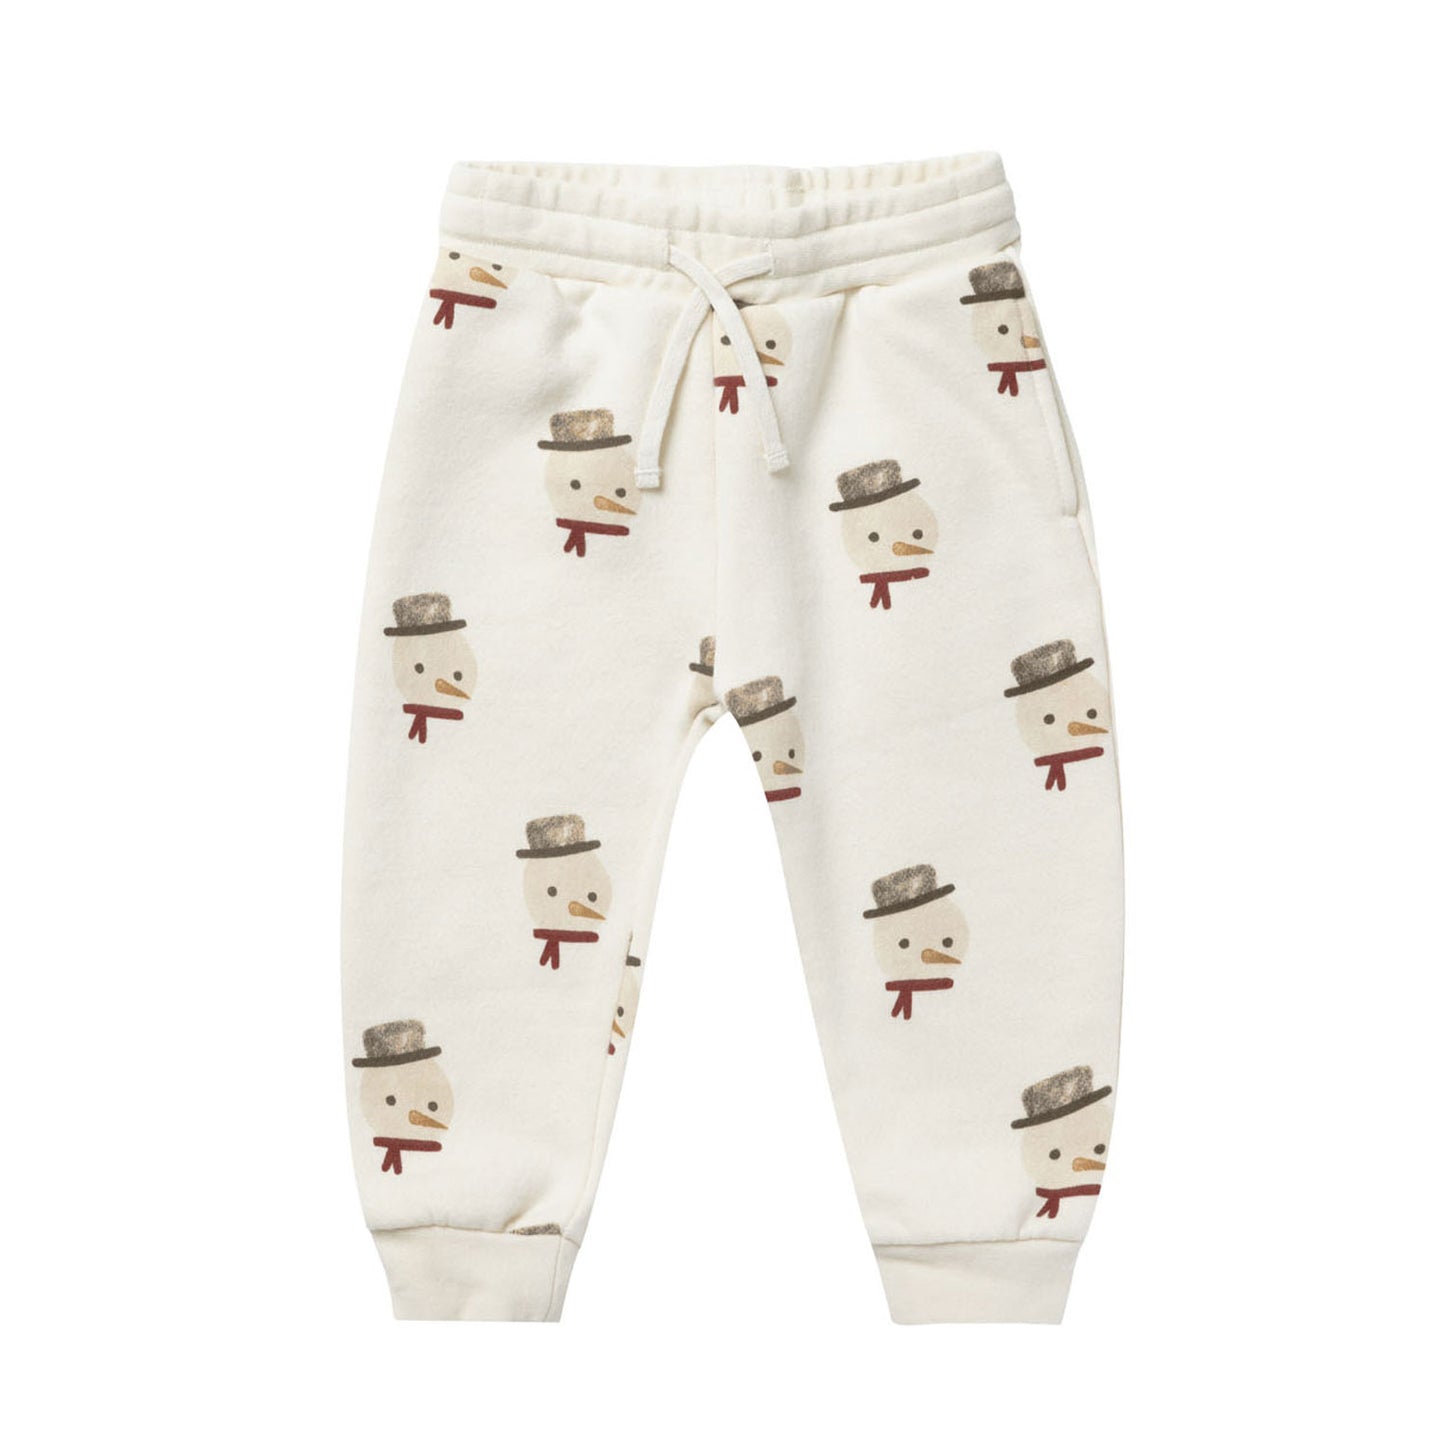 Rylee and Cru Jogger Pant - Snowman - Ivory